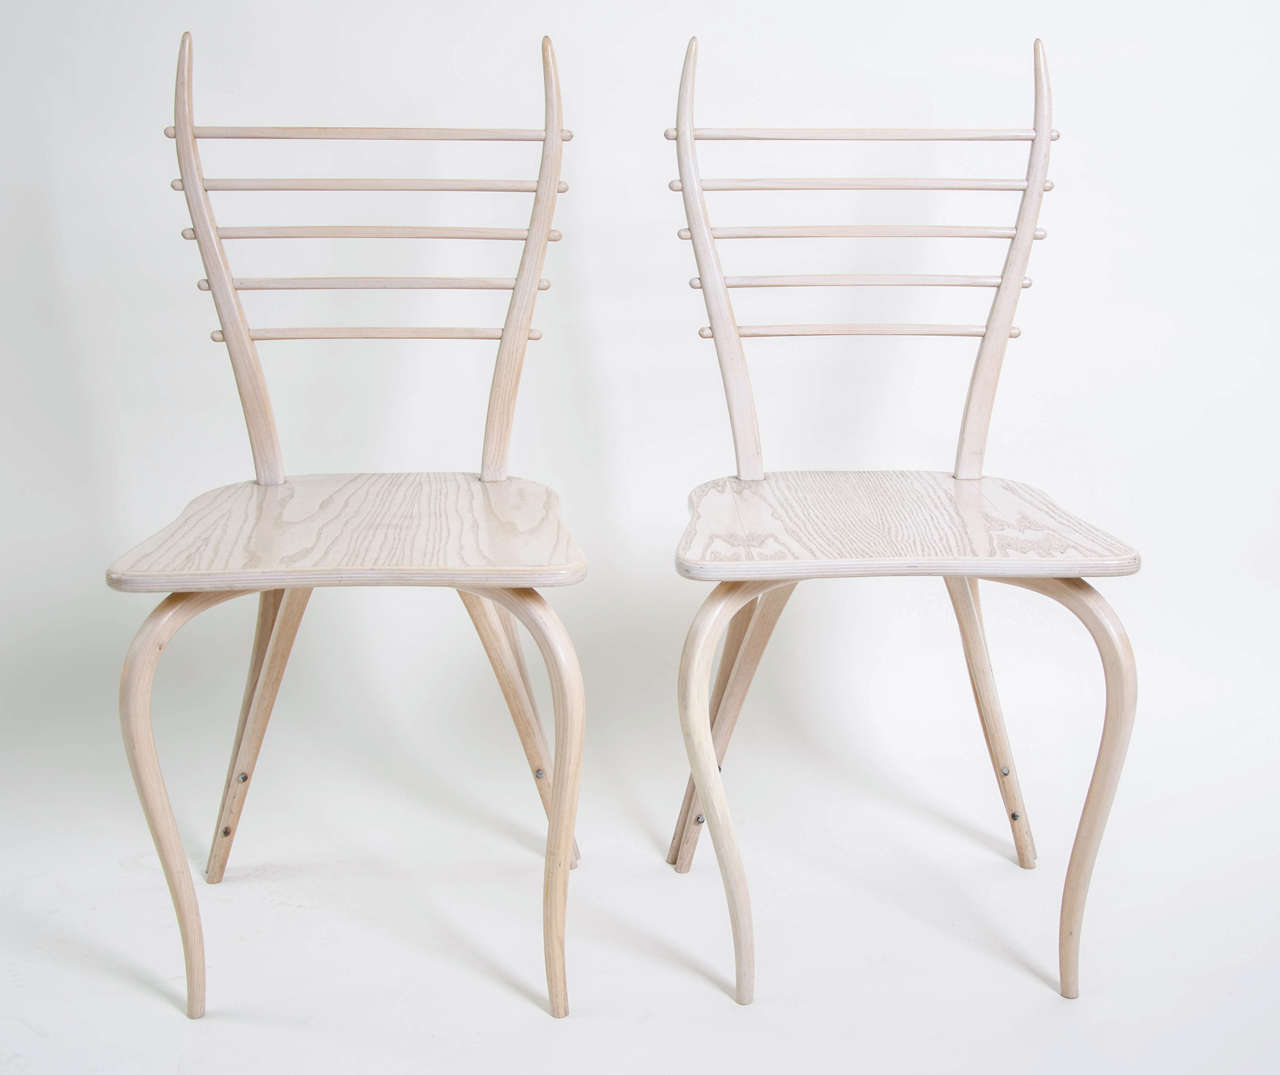 A pair of  Lyre chairs by the acclaimed designers produced by Furniture in 1989. This model in bent birch wood and bronze fixtures is part of the Design collection at the Pompidou Center in Paris where they were shown as part of the major 1997